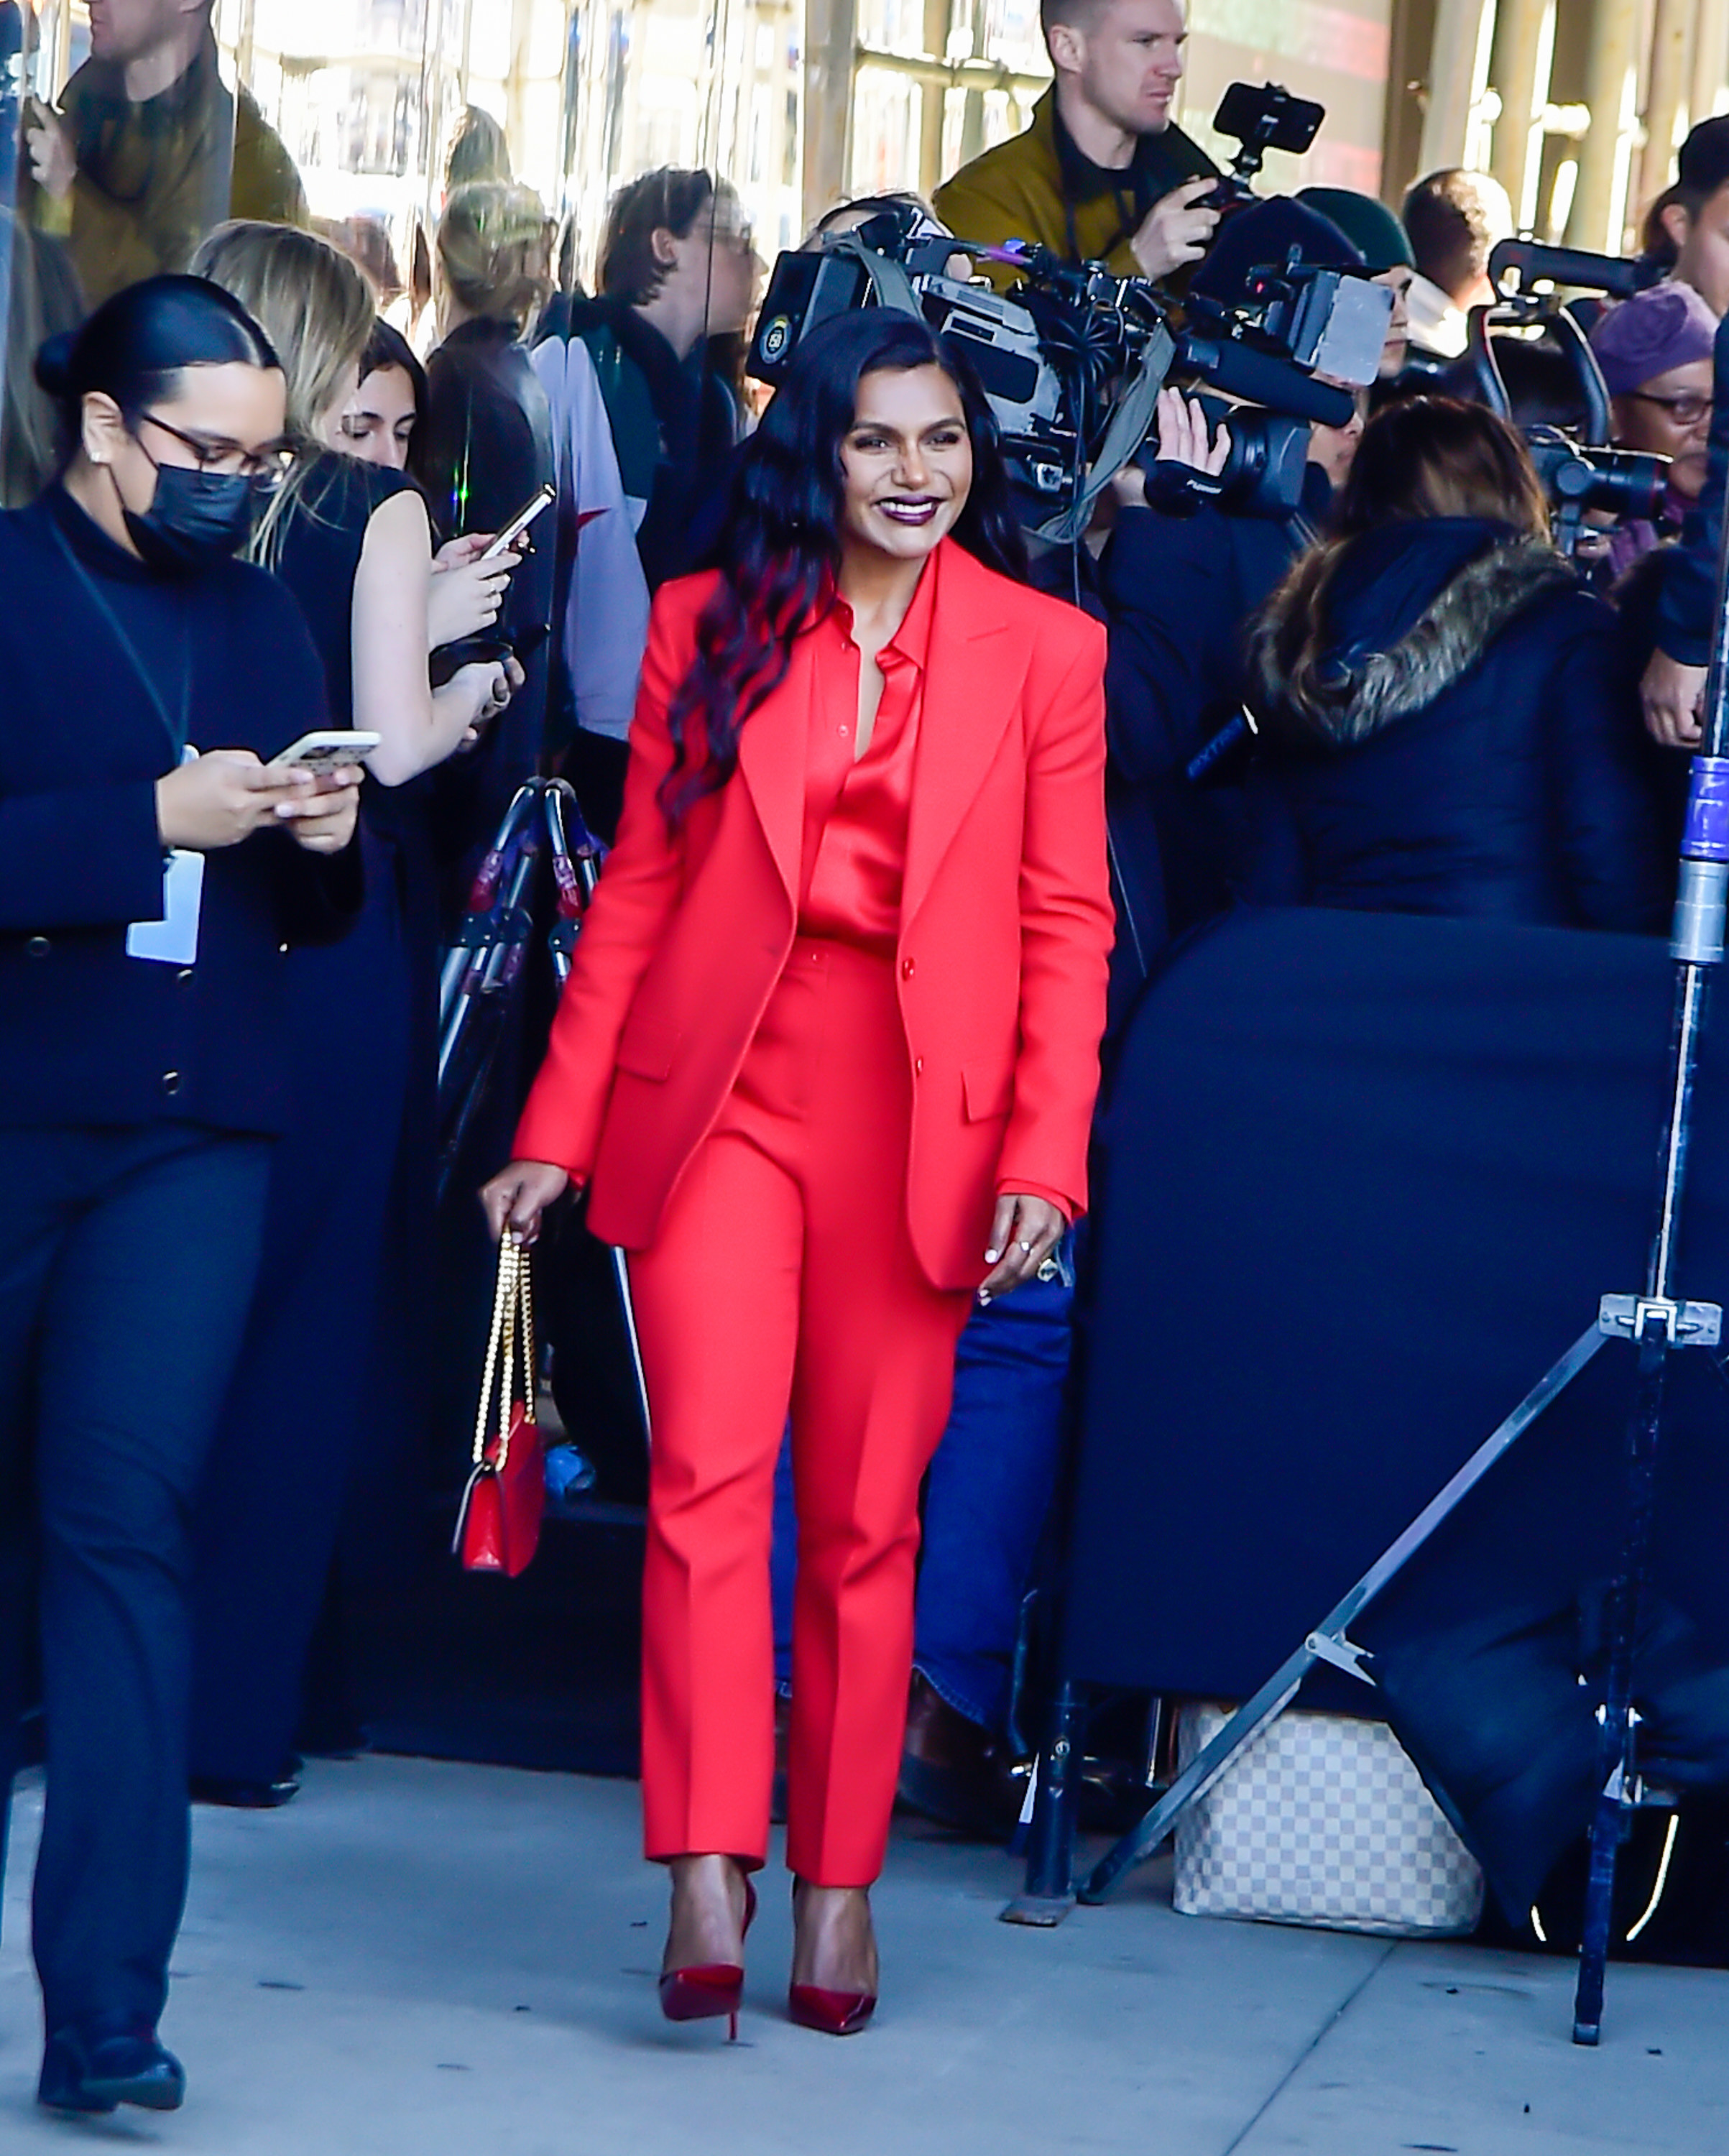 Mindy walks out of a building in a pantsuit with matching bag and stilletto heels